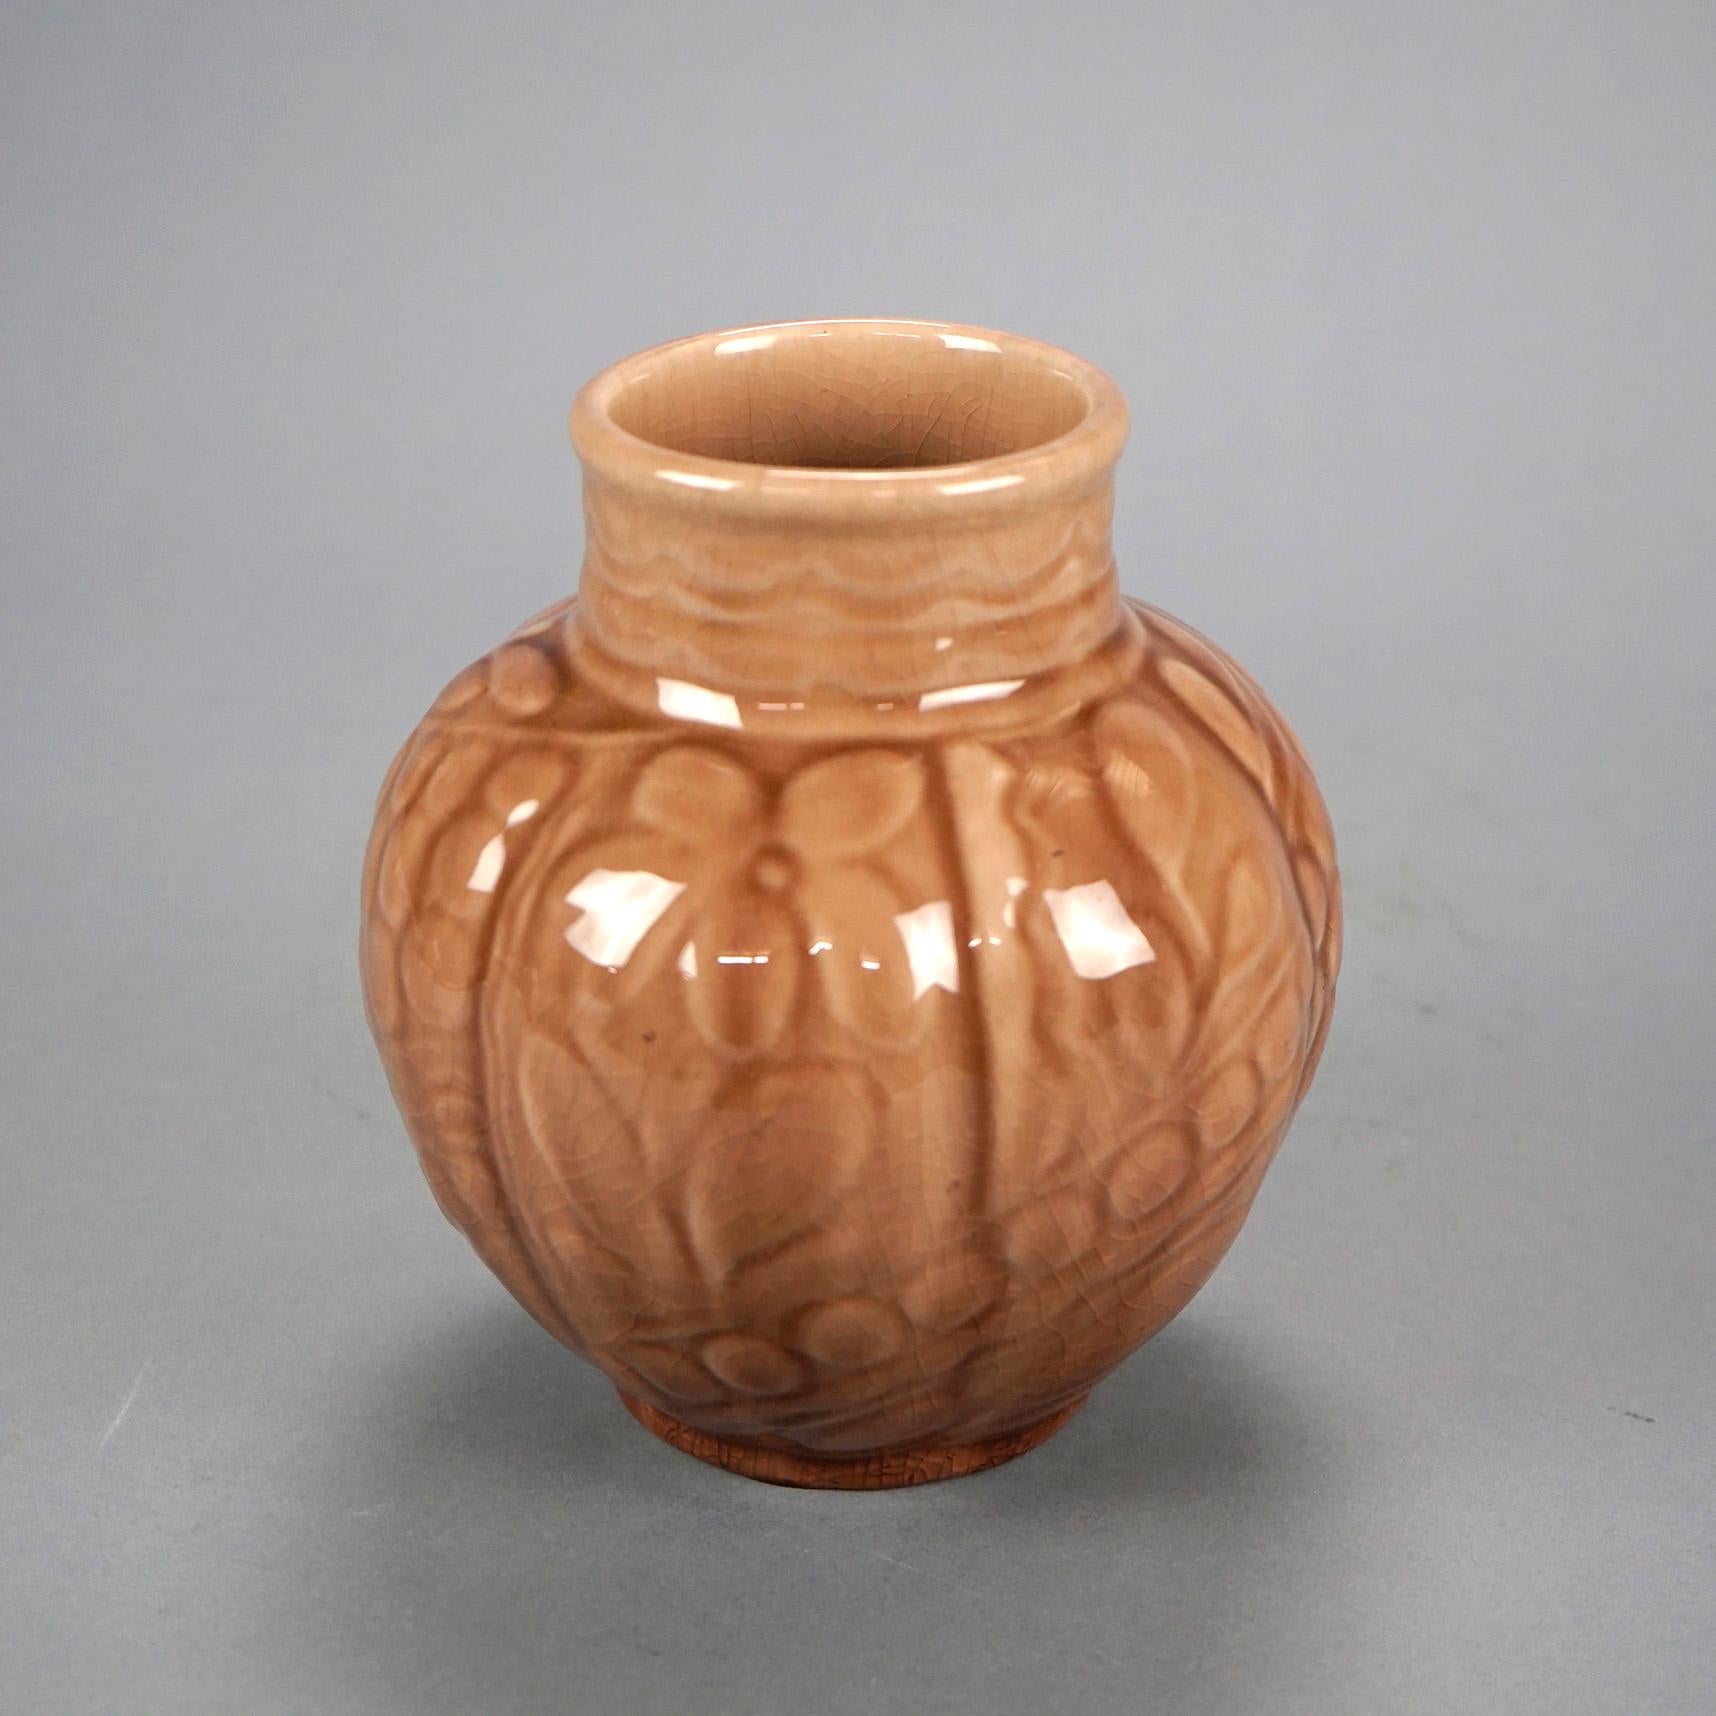 An antique Arts and Crafts vase by Rookwood offers art pottery construction in melon form and having stylized incised flowers and high glaze, 1944.

Measures- 6.75'' H x 6'' W x 6'' D.

Catalogue Note: Ask about DISCOUNTED DELIVERY RATES available